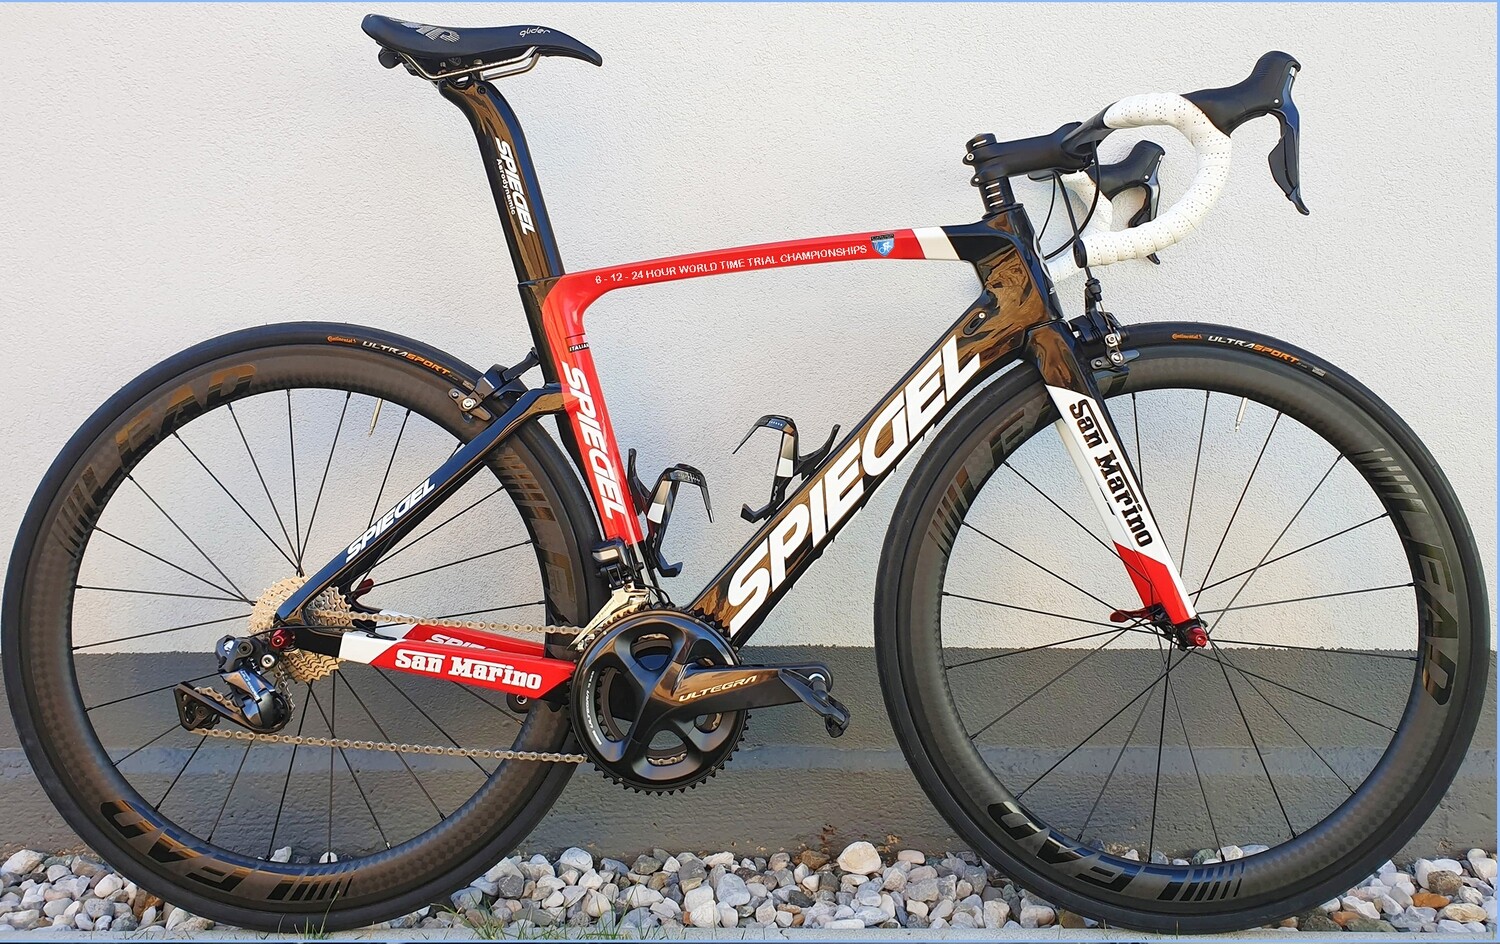 WTTC - Spiegel San Marino With Personalized CATEGORY WINNER Graphics - Disc Brake Compatible (Non-USA Shipping)